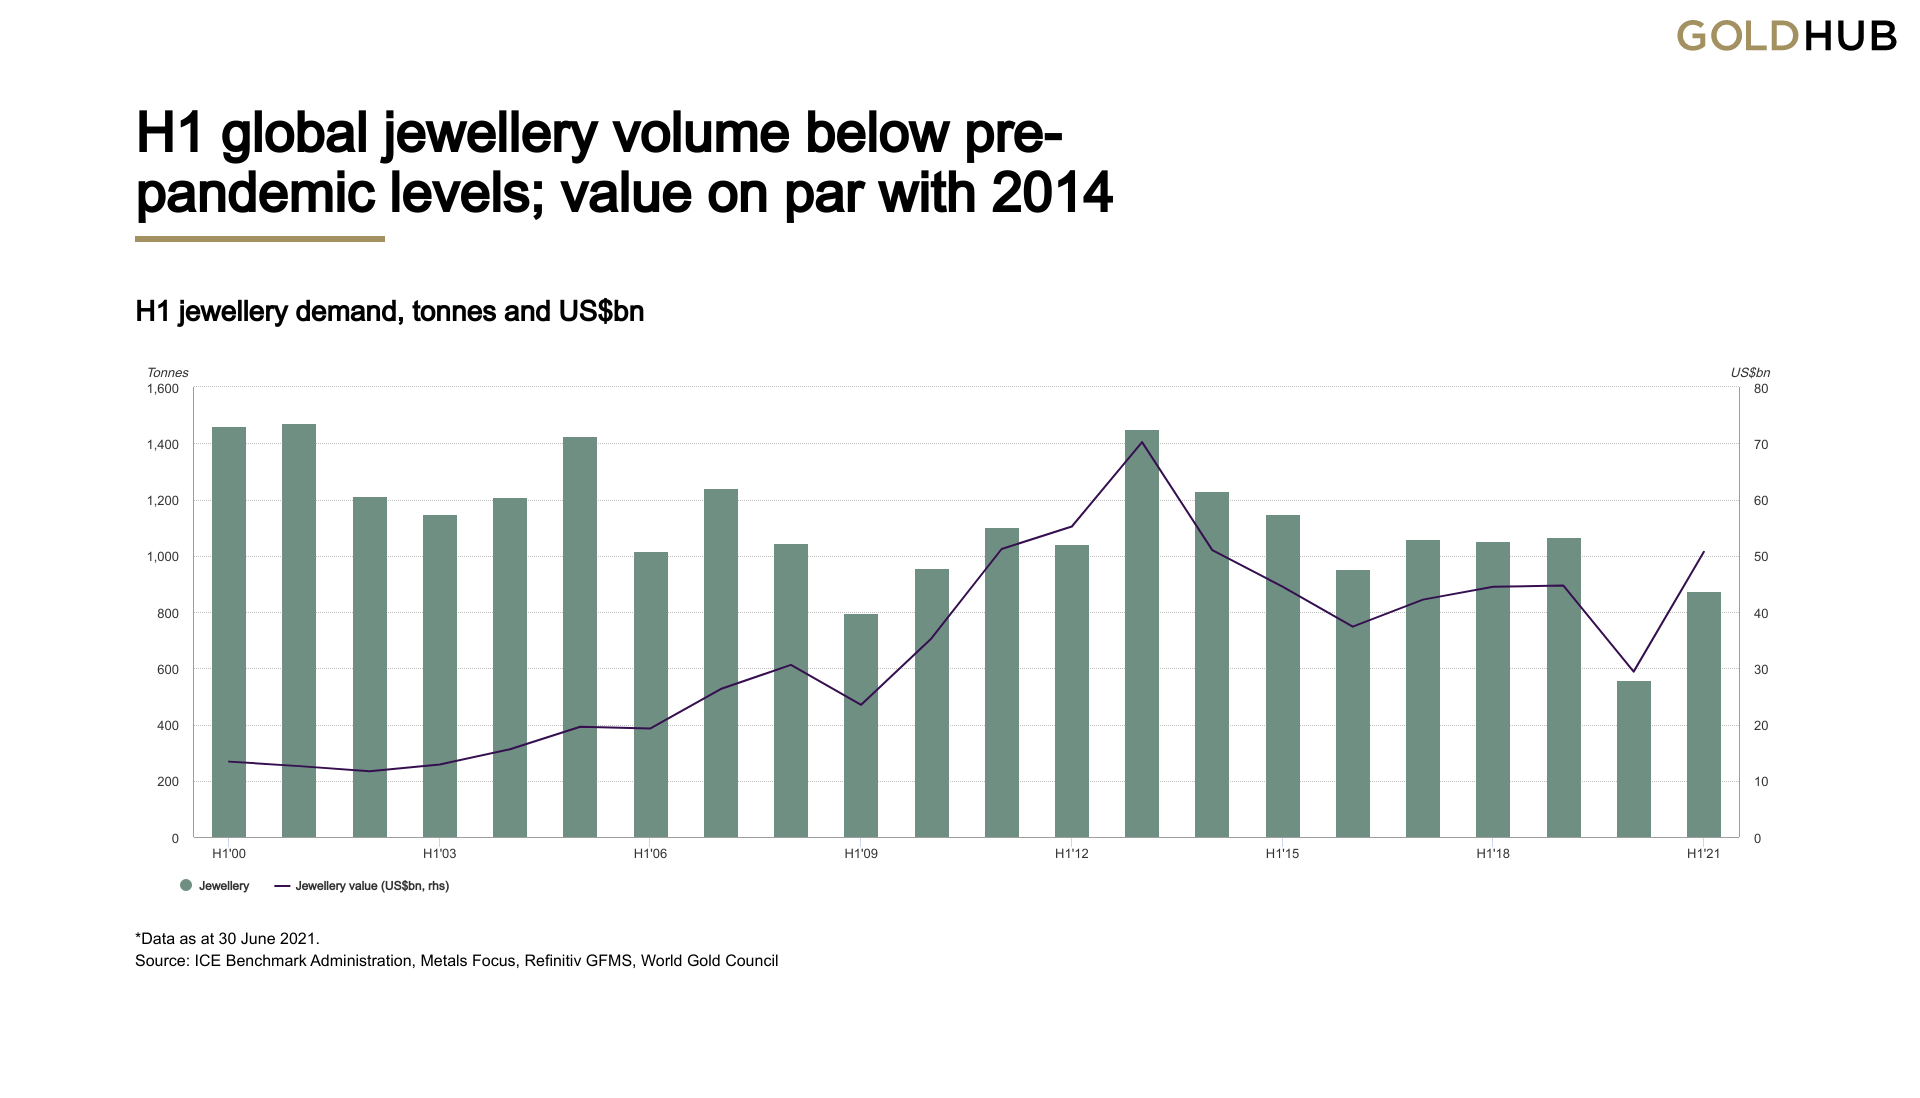 H1 global jewellery volume below pre-pandemic levels; value on par with 2014